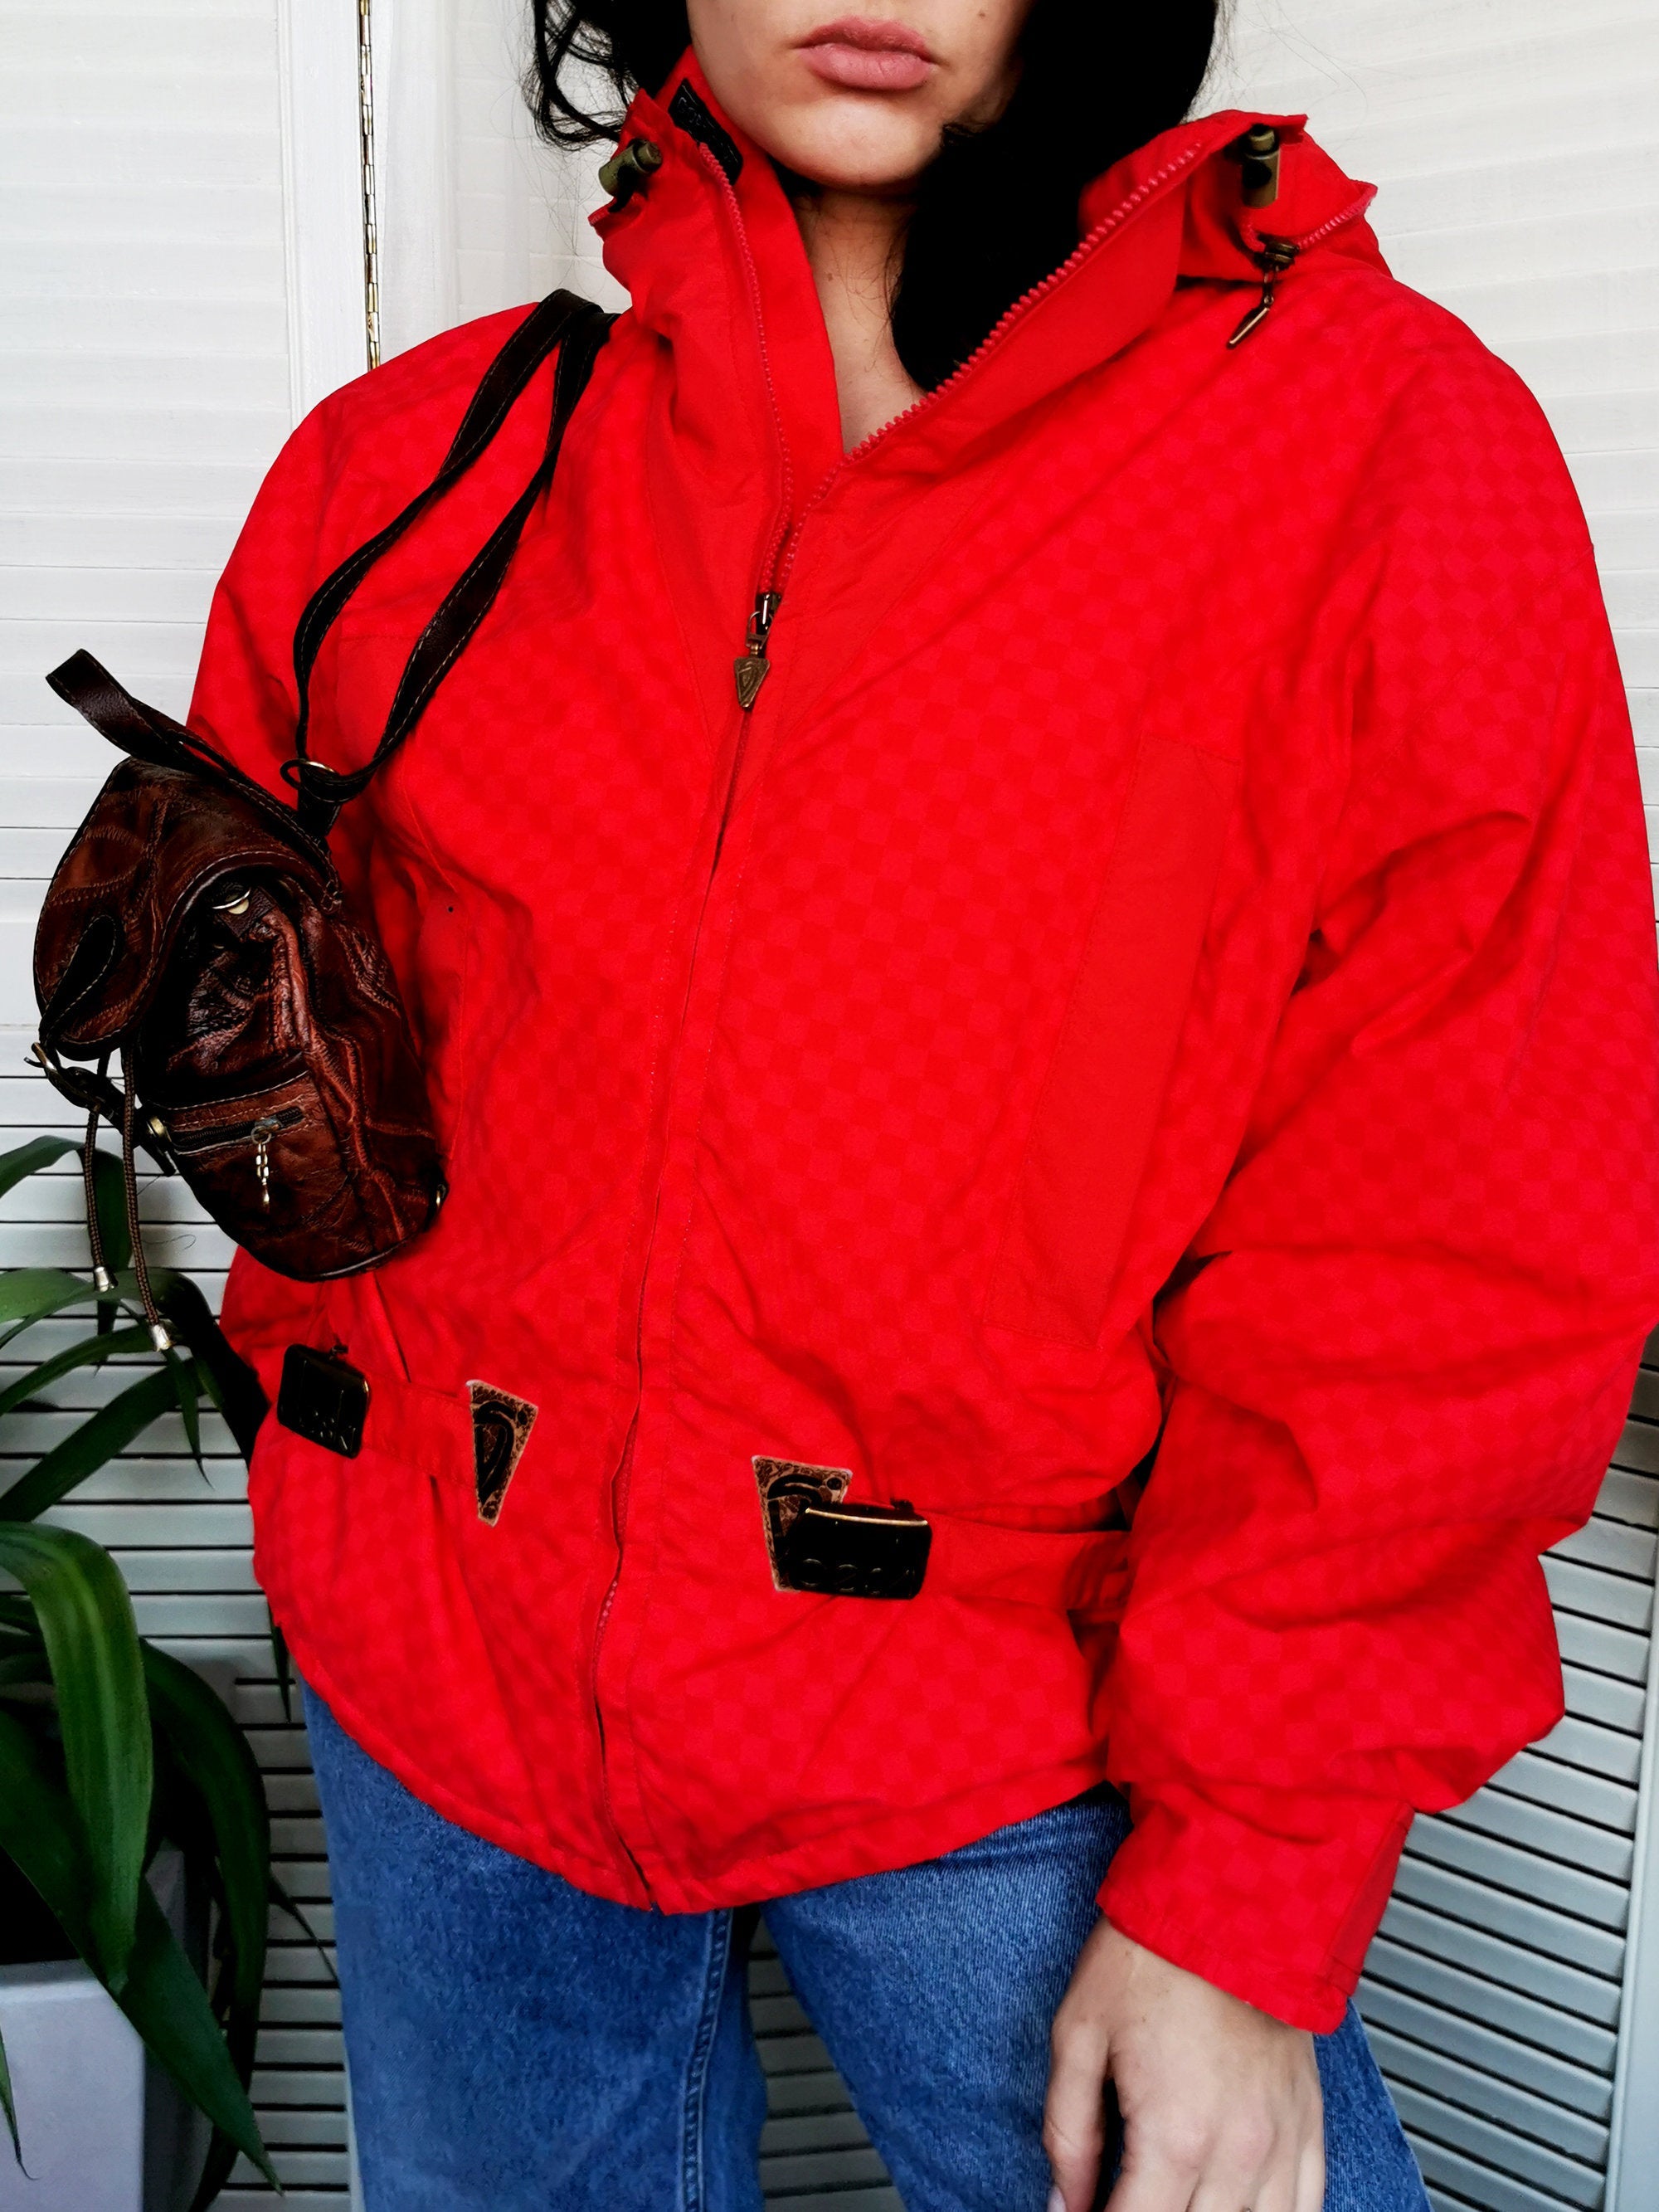 Vintage 90s red chess print hooded jacket